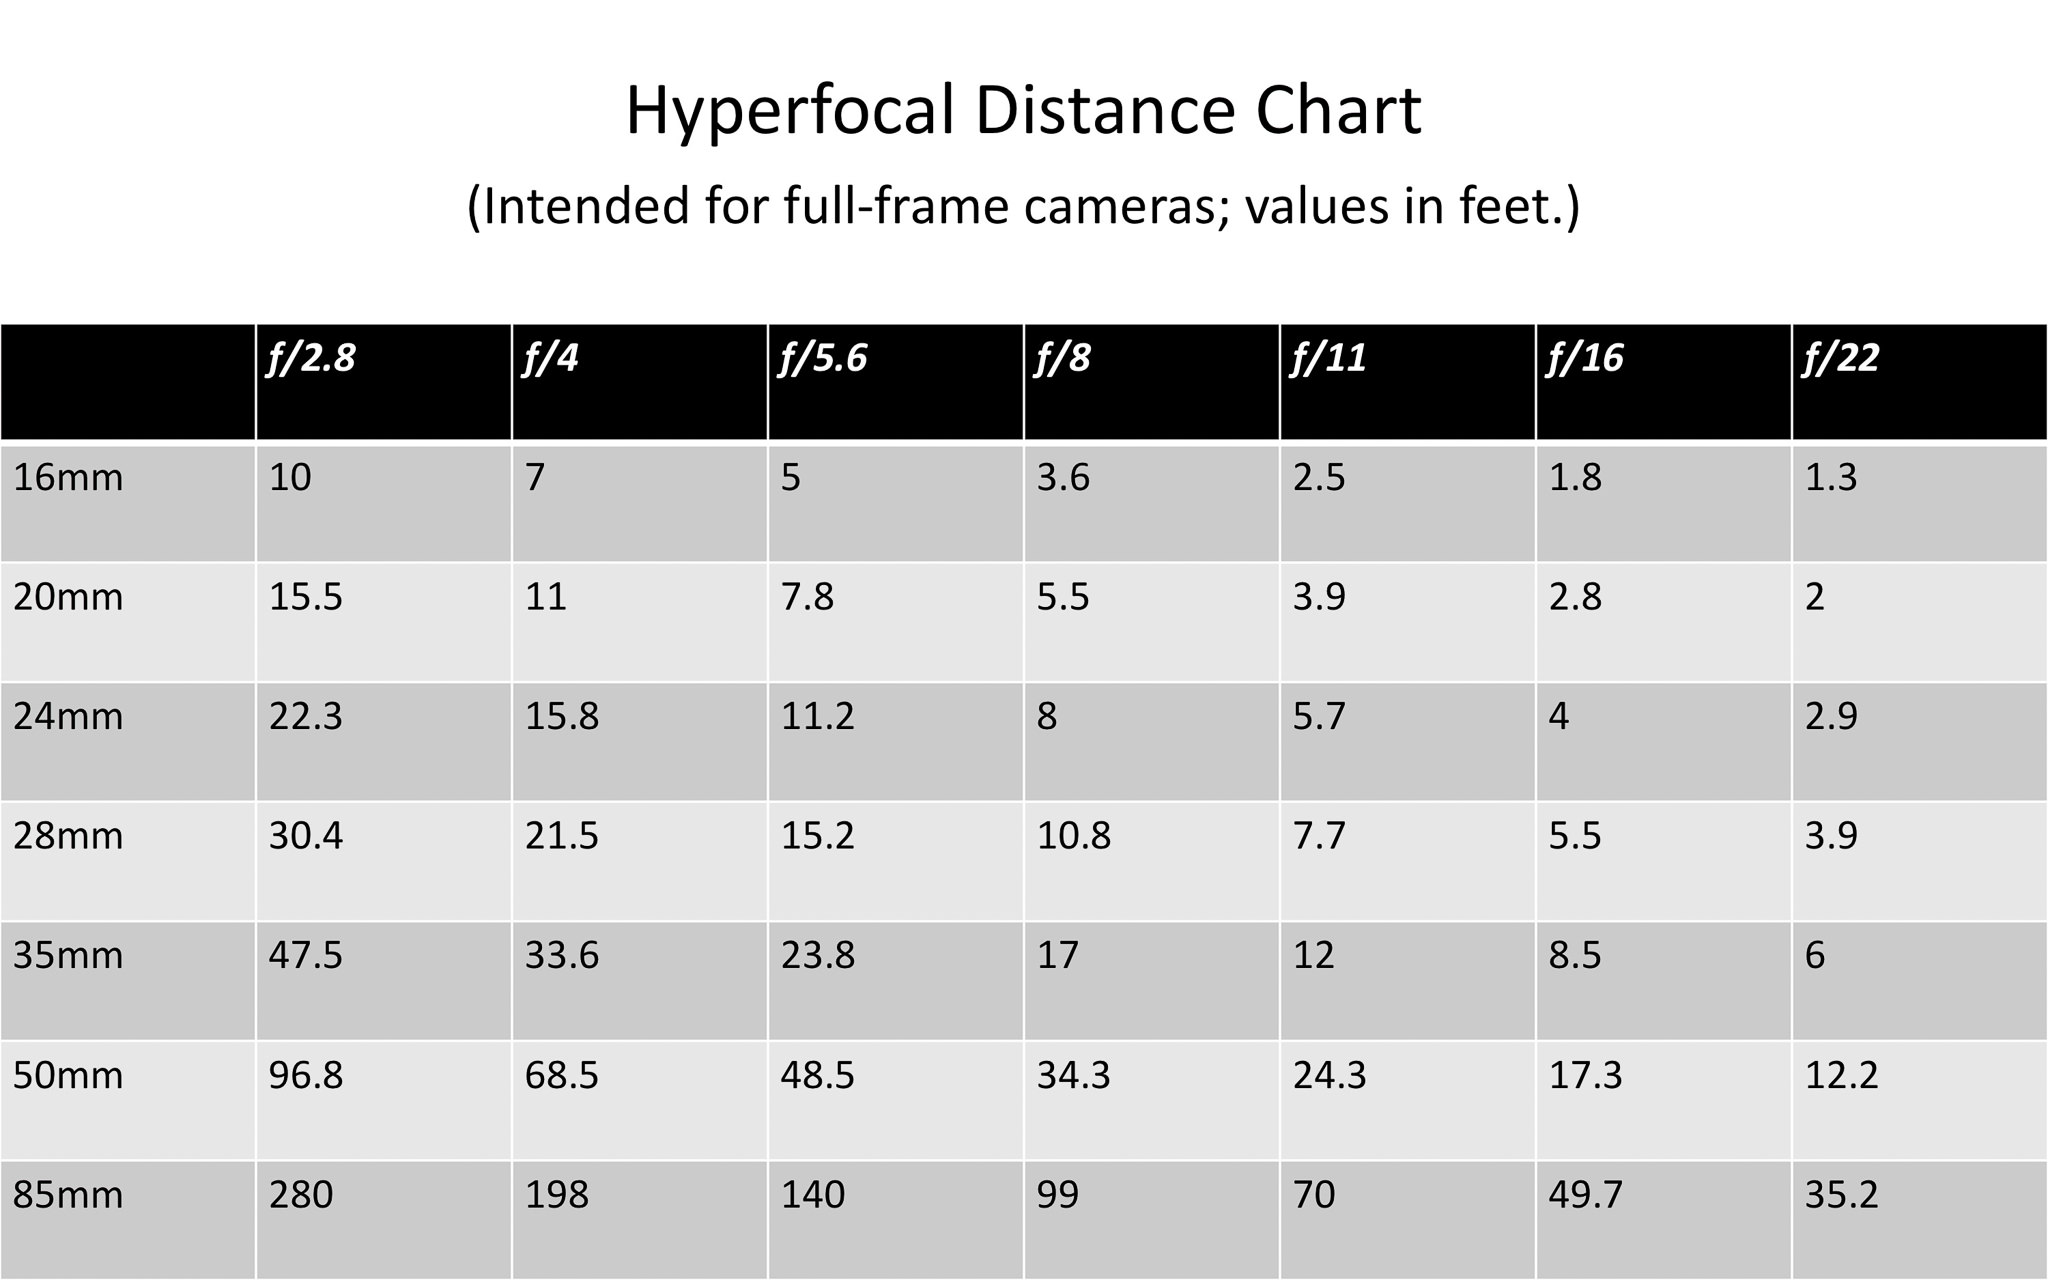 Why Hyperfocal Distance Charts Are Wrong